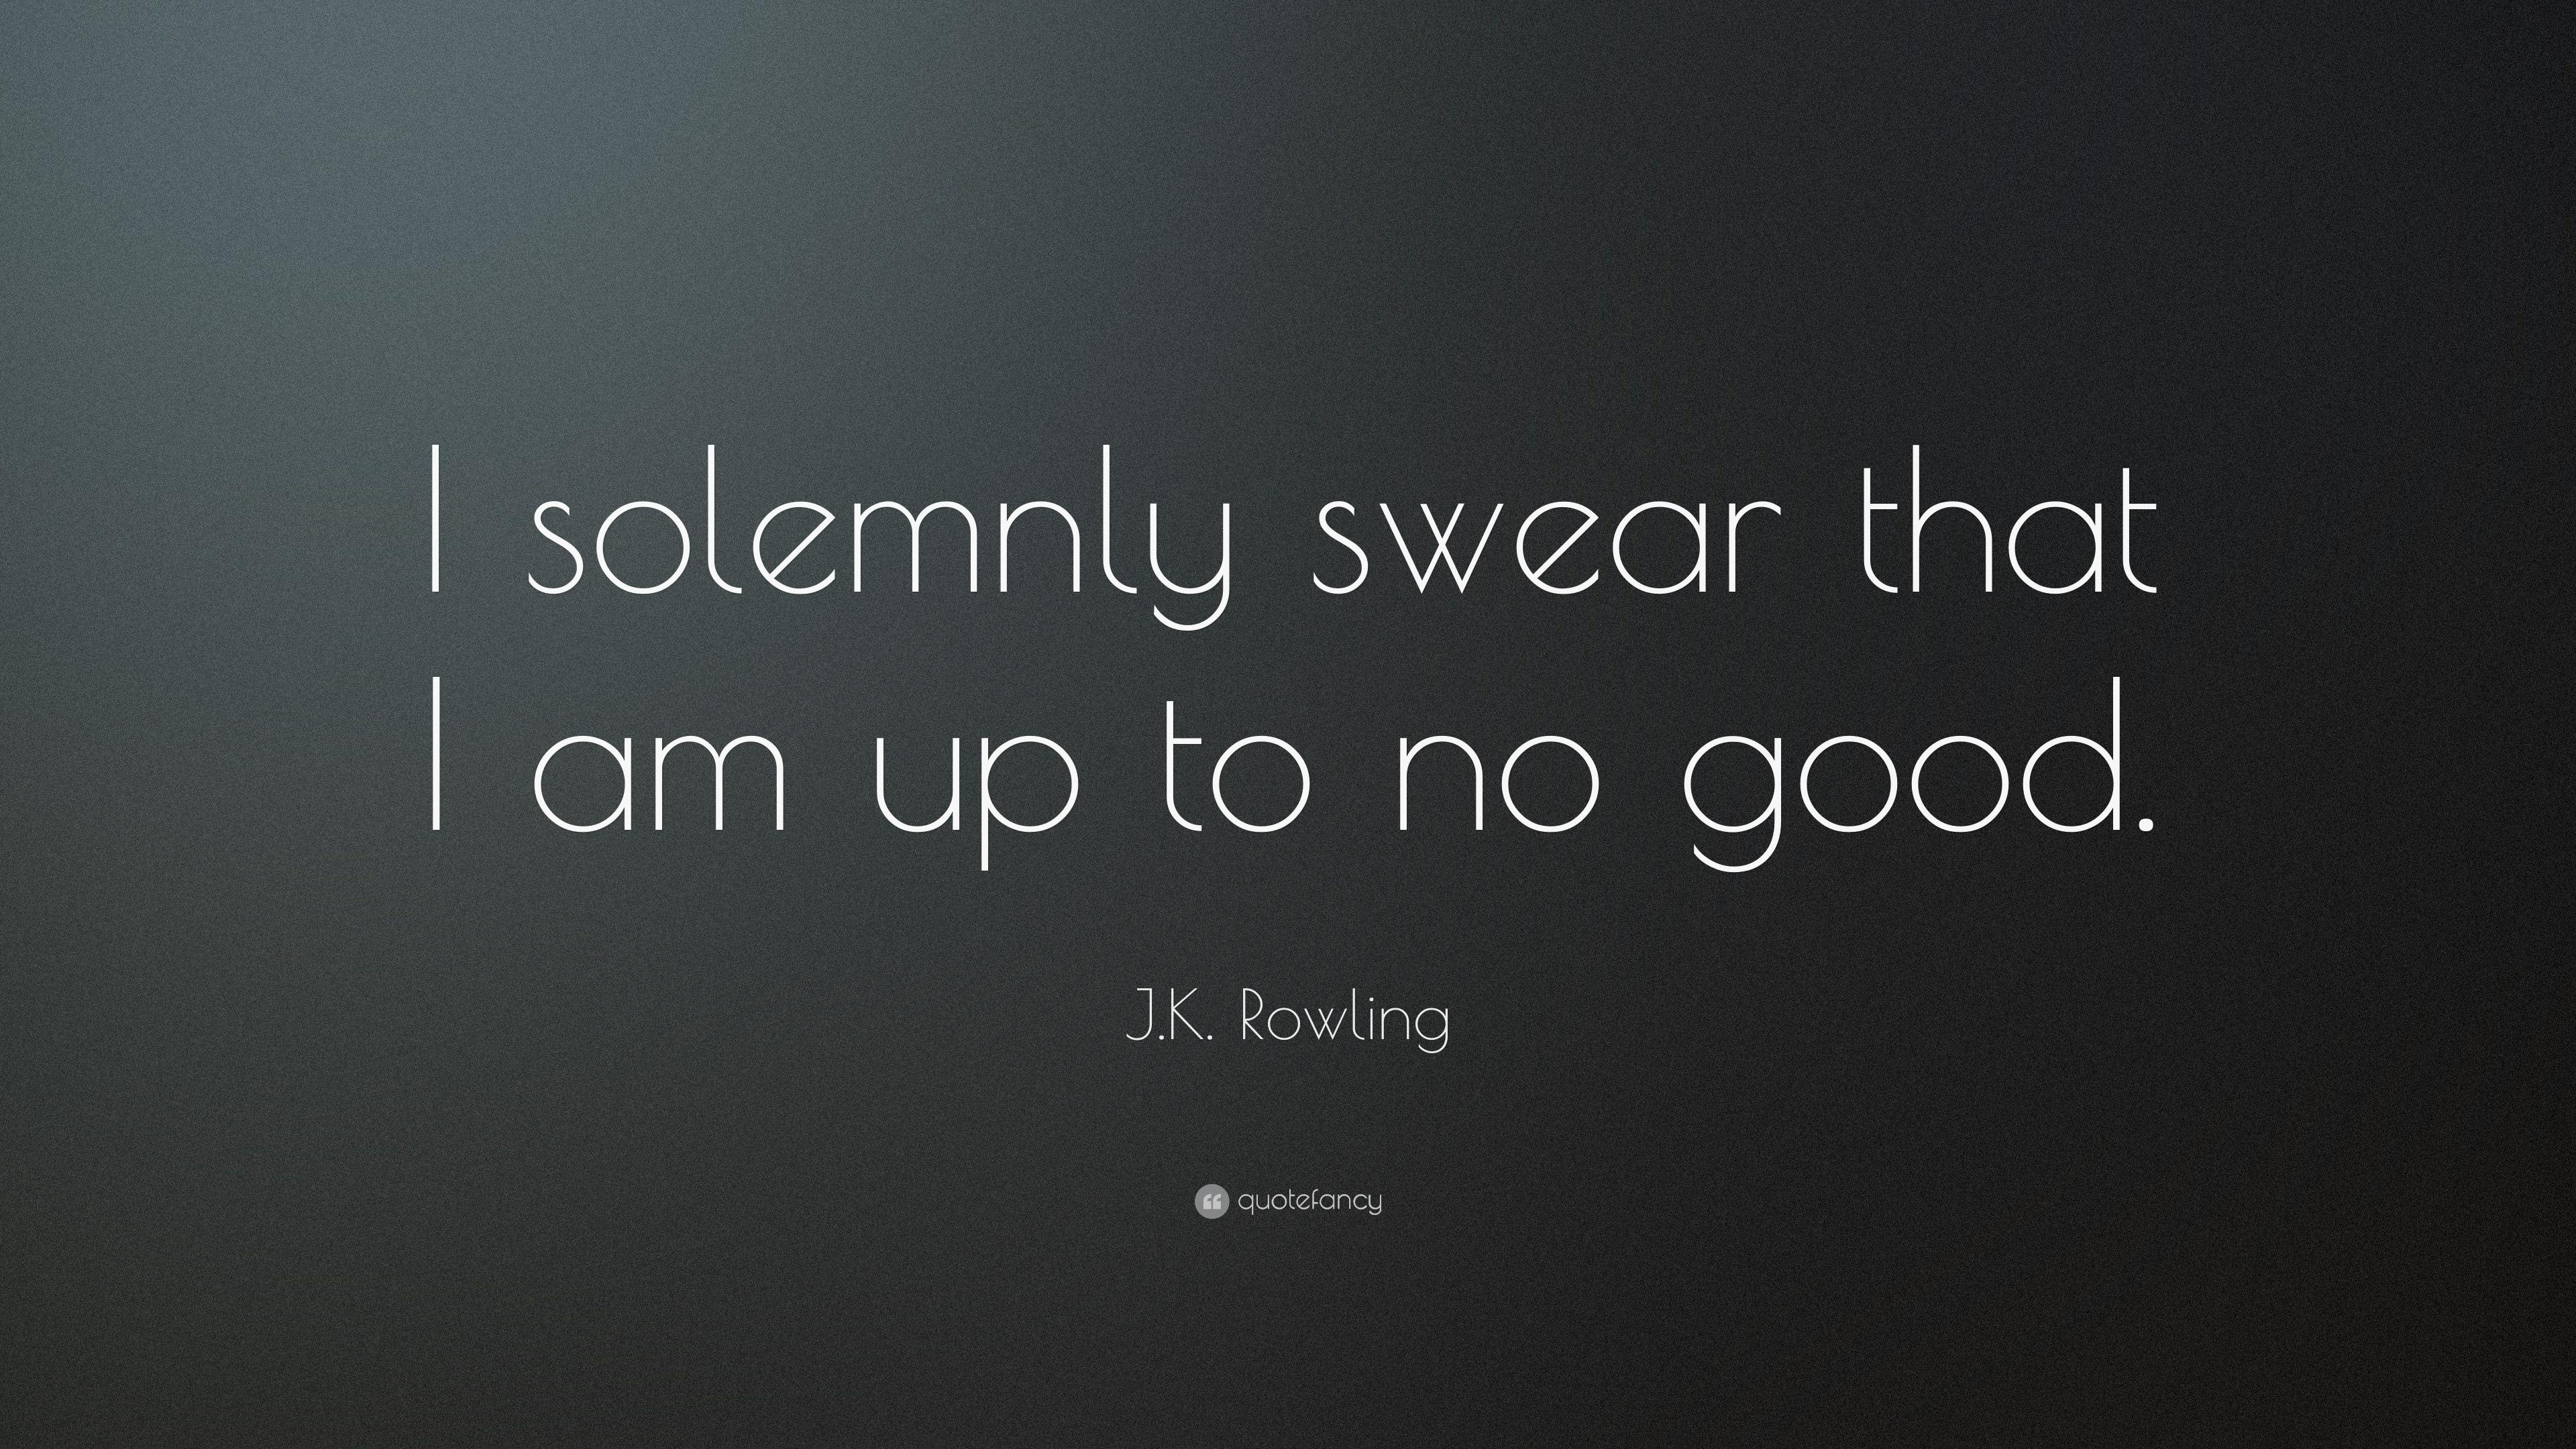 J.K. Rowling Quote: “I solemnly swear that I am up to no